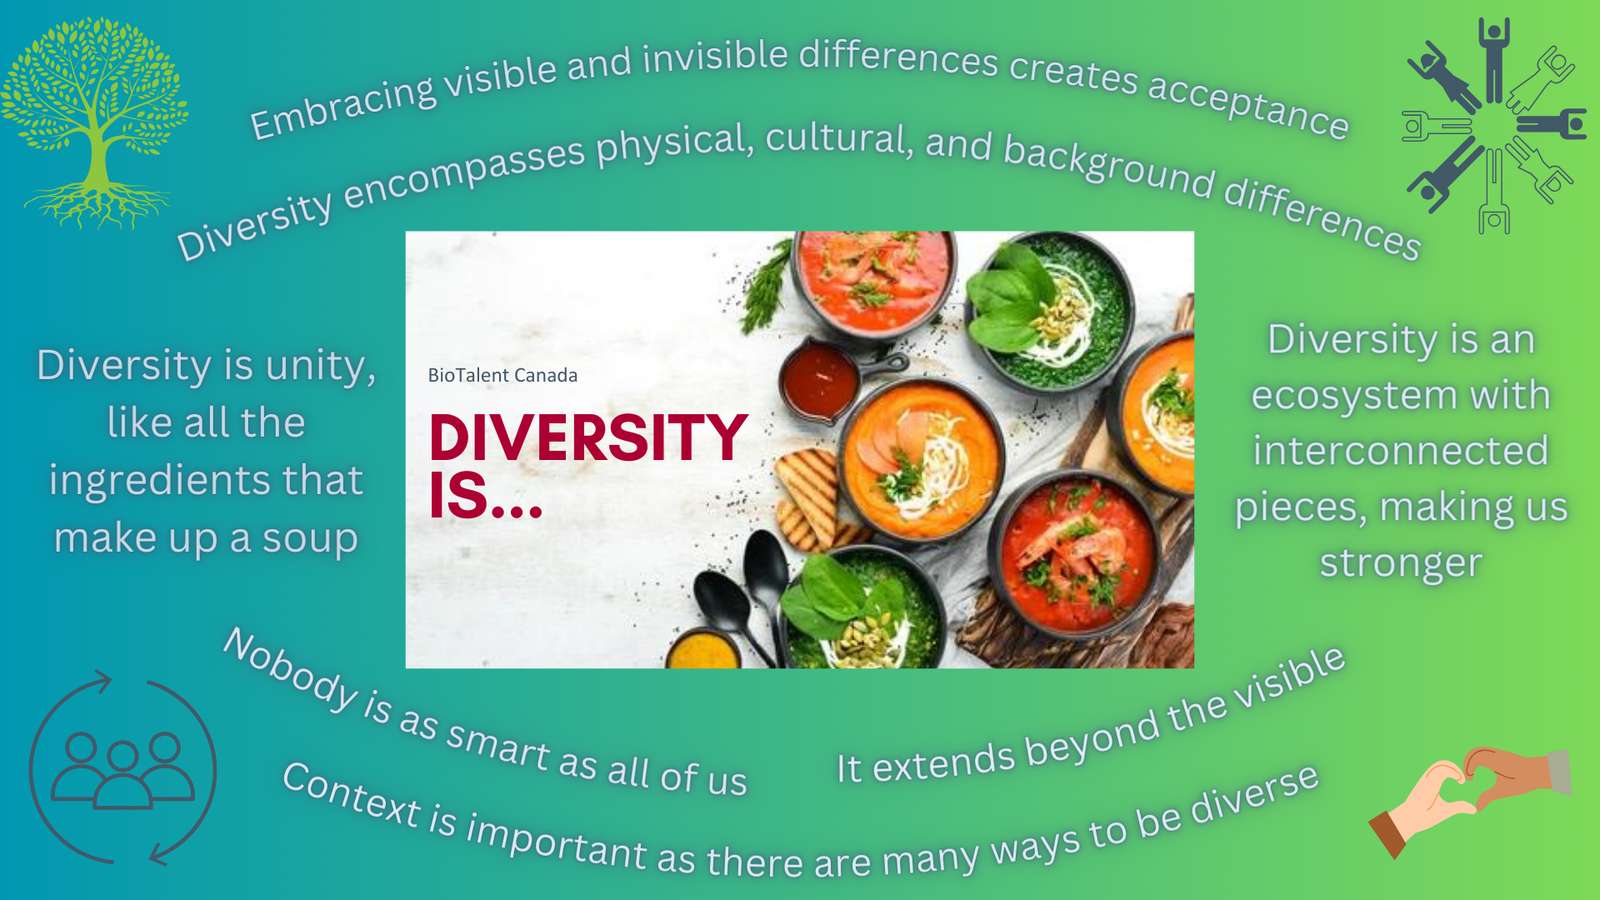 BioTalent Canada Diversity Is puzzle online from photo